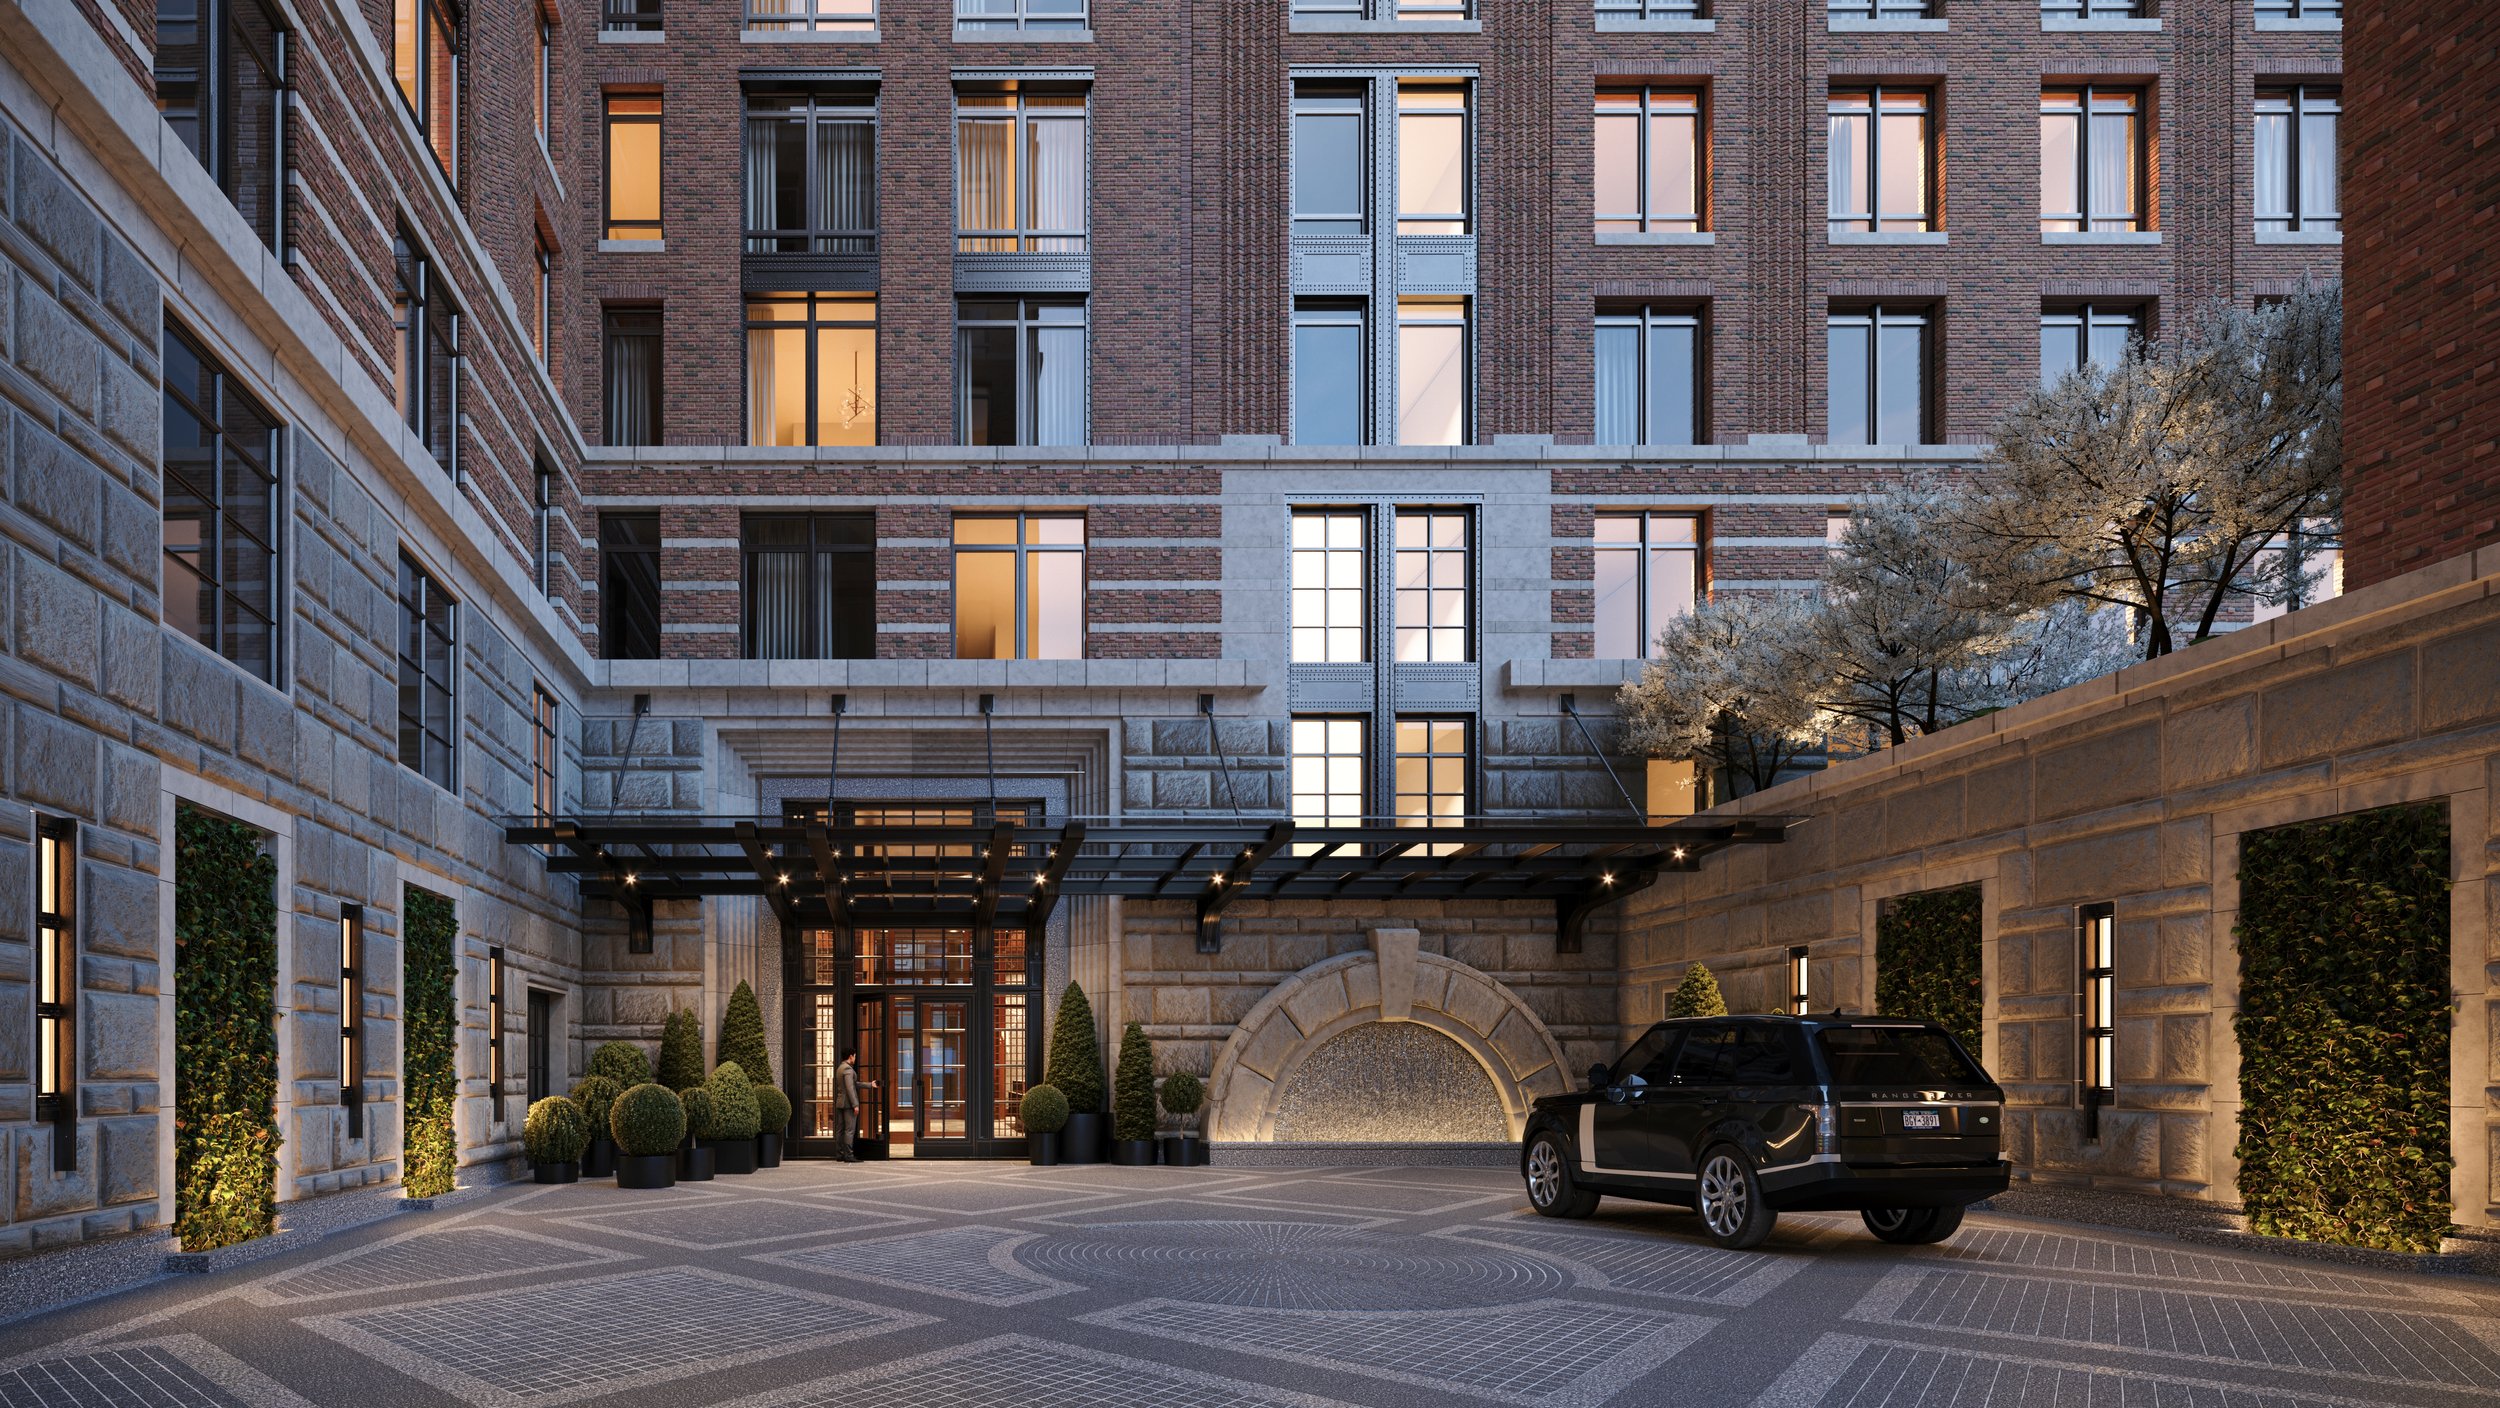  Related Companies, in partnership with Mitsui Fudosan America, today announced the launch of sales at The Cortland in the West Chelsea neighborhood of New York City. The luxury condominium building designed by Robert A.M. Stern Architects, with inte